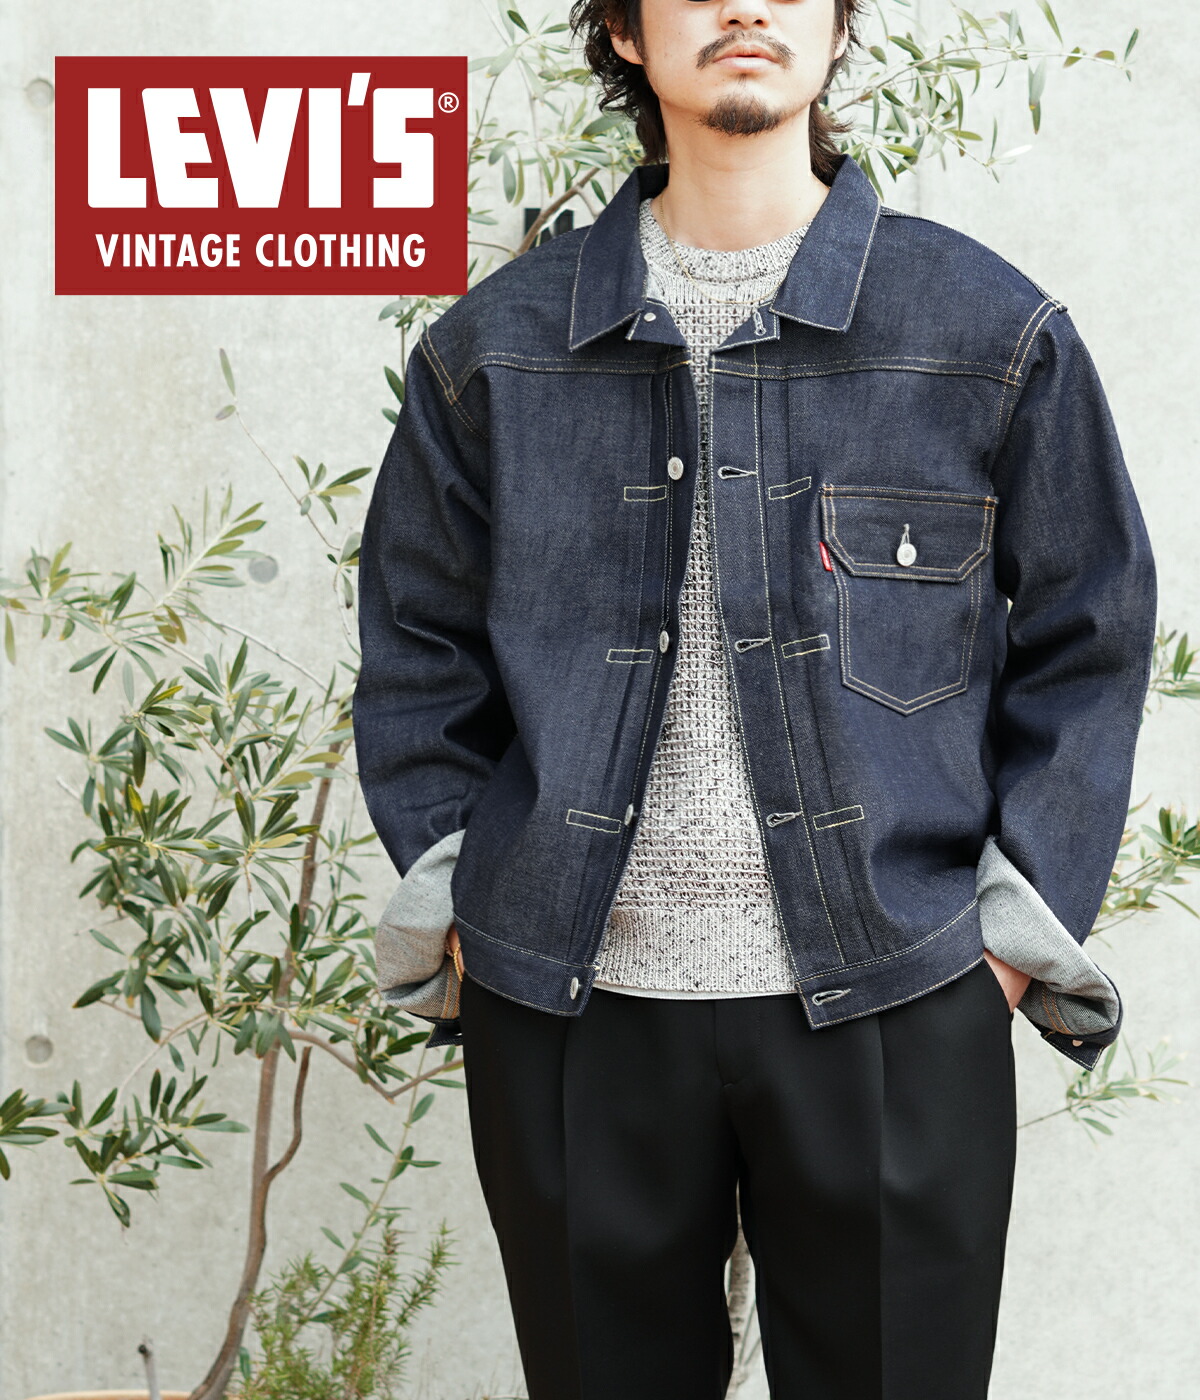 LEVI'S VINTAGE CLOTHING / リーバイス ヴィンテージ クロージング ： LVC 1936 TYPE 1 JACKET ： 70506-0028｜arknets｜02